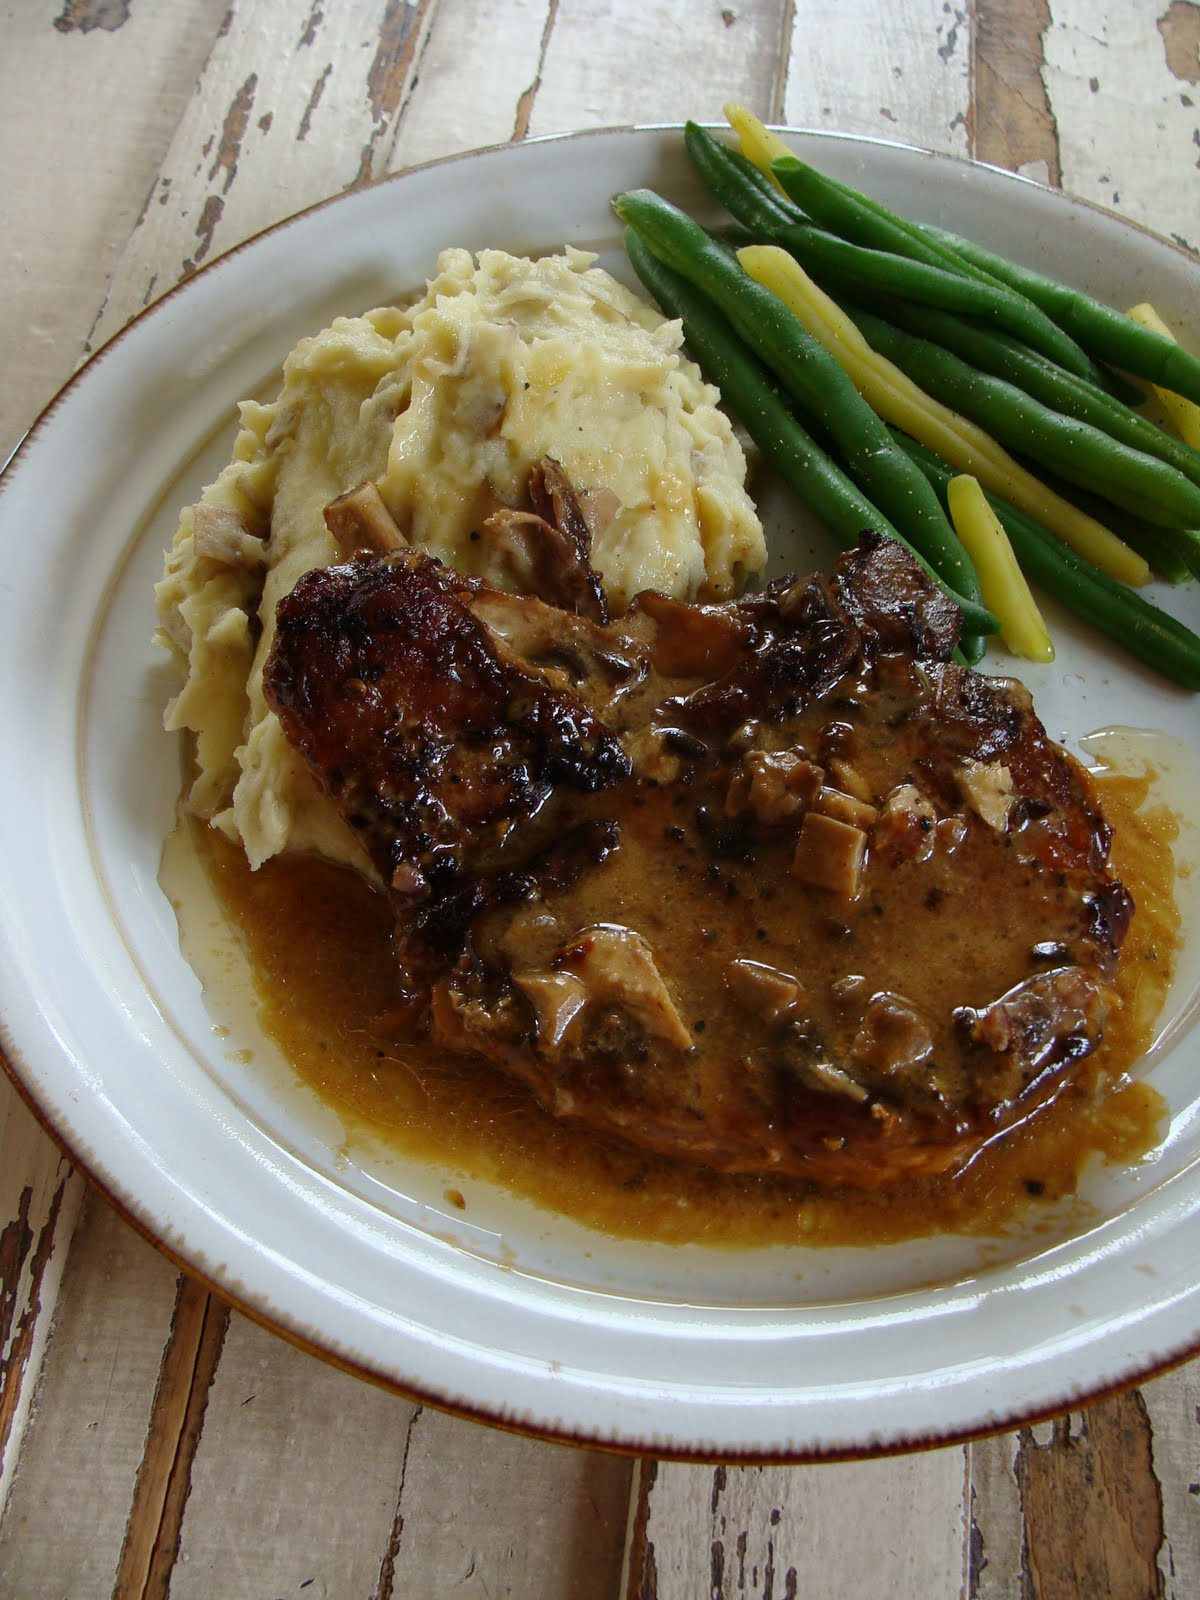 Cooking Pork Chops In Slow Cooker
 Just Cooking Slow Cooker Pork Chops with Mushroom Gravy